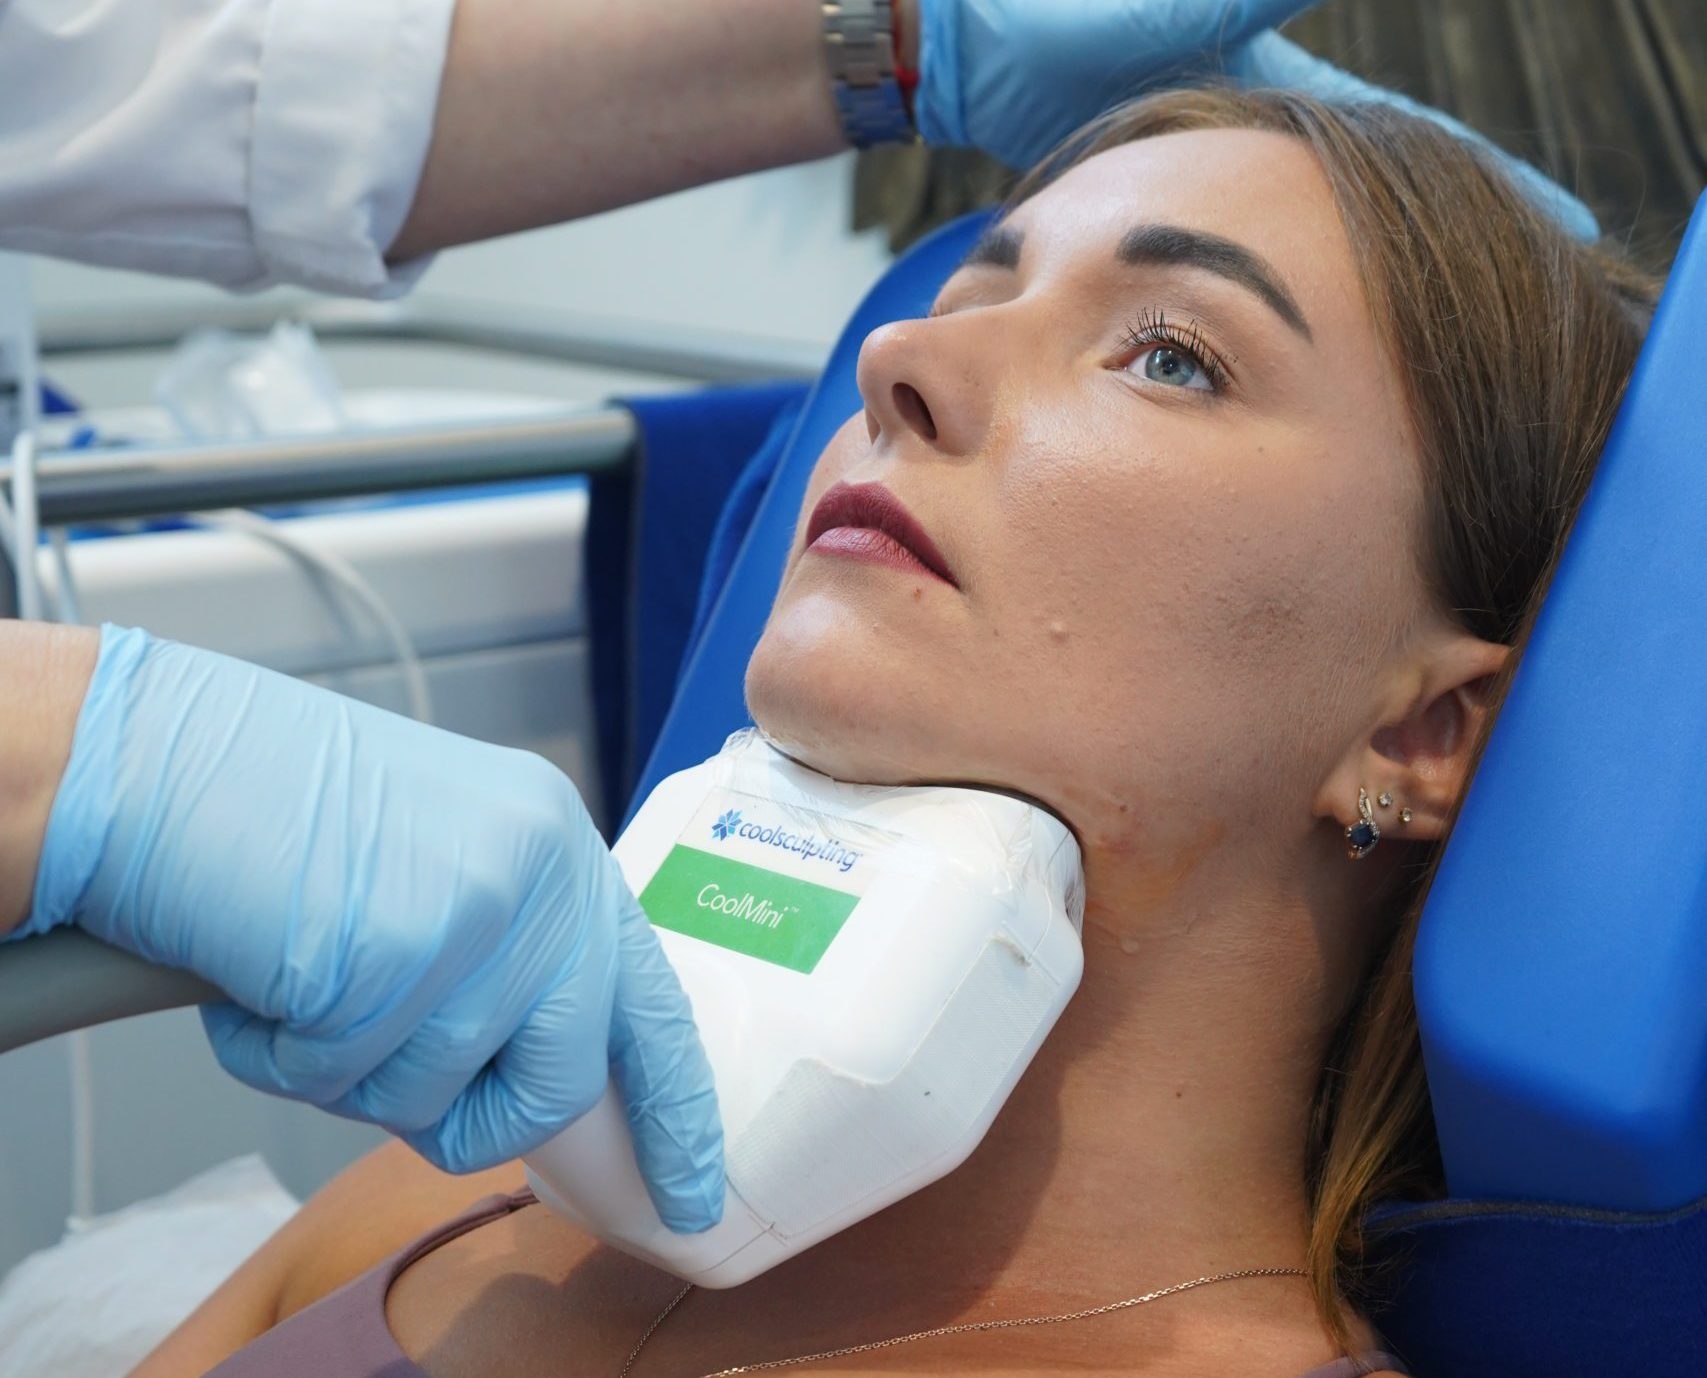 Woman getting CoolSculpting done on her chin in Los Angeles